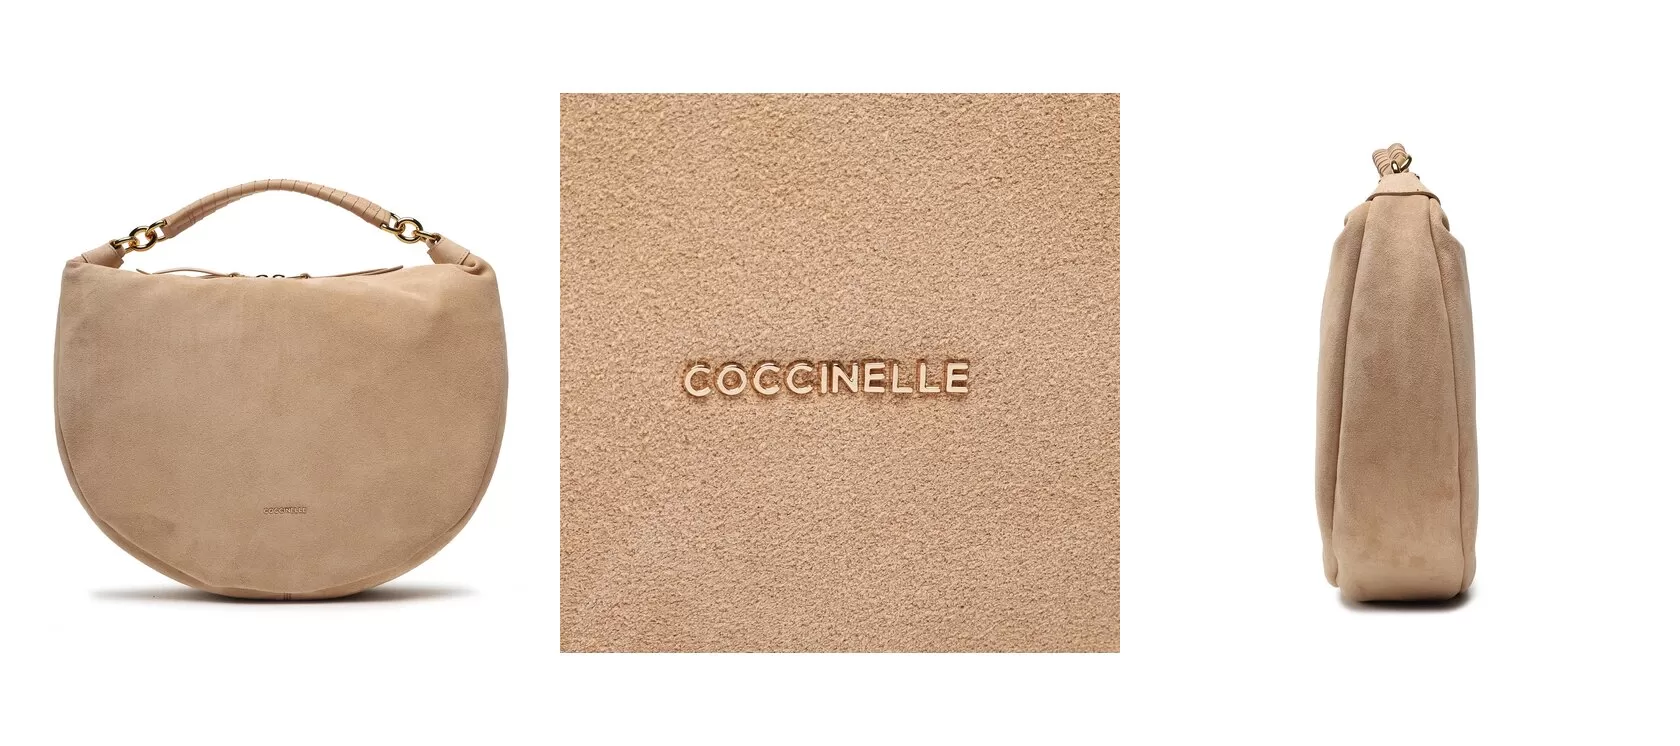 Coccinelle Torebka N5H Coccinellemaelody Suede E1 N5H 13 01 01 Beżowy